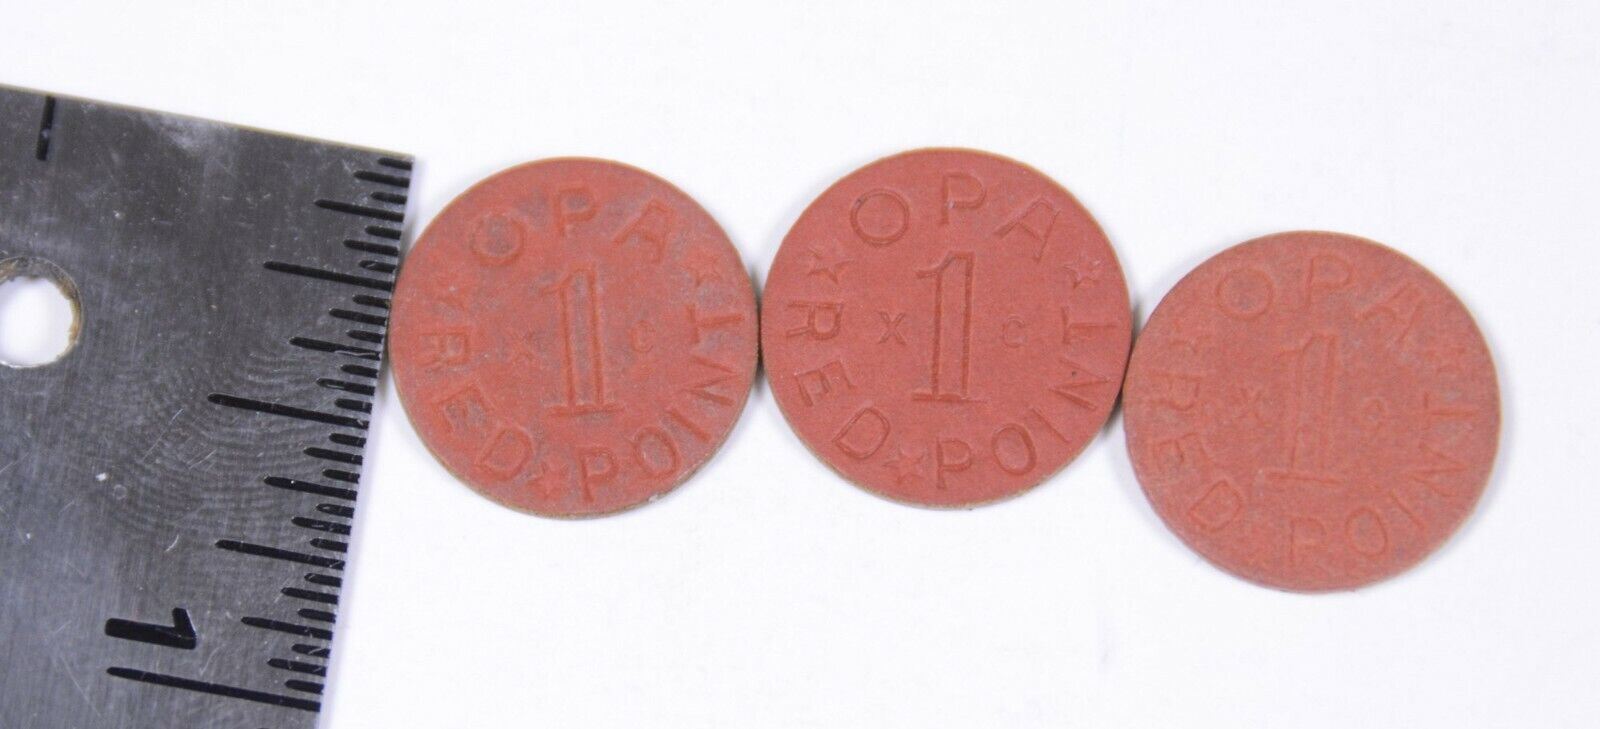 Lot of (3) Vintage WWII ERA  Red OPA Tax Tokens Marked XC  issued 1942 to 1945  Без бренда - фотография #2